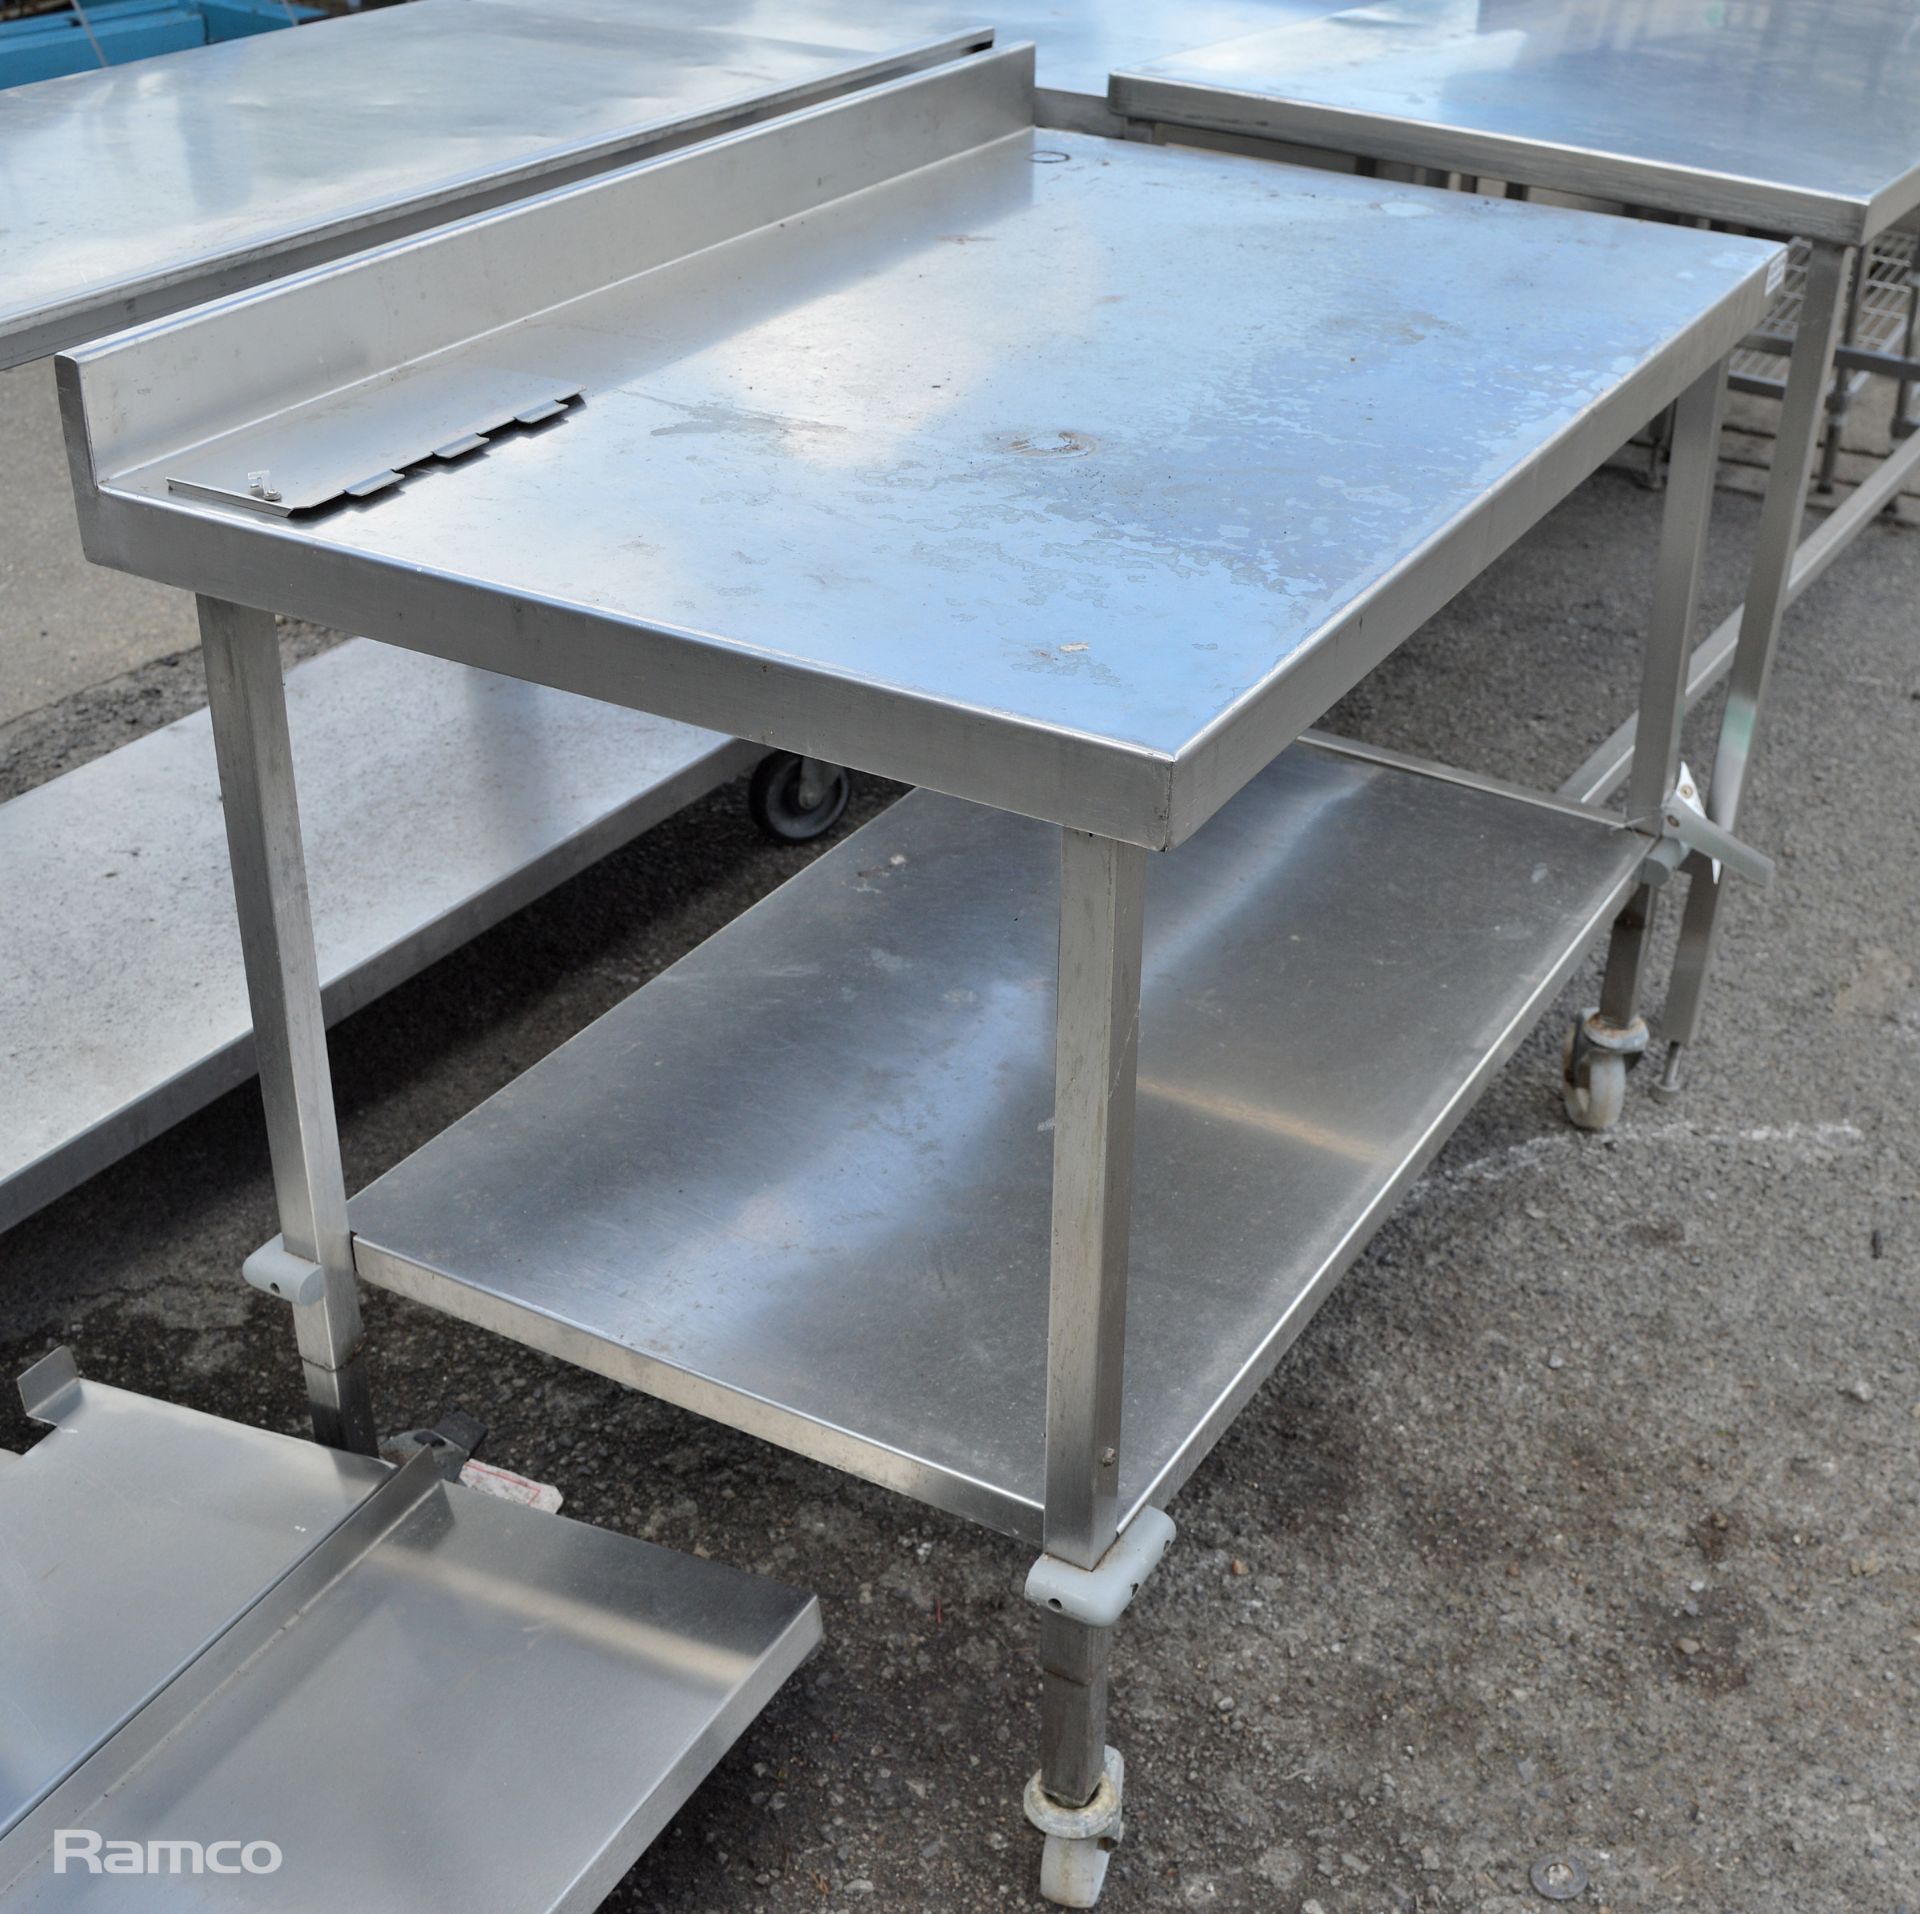 Stainless steel Counter with splashback L111 x W70 x H91cm - Image 2 of 3